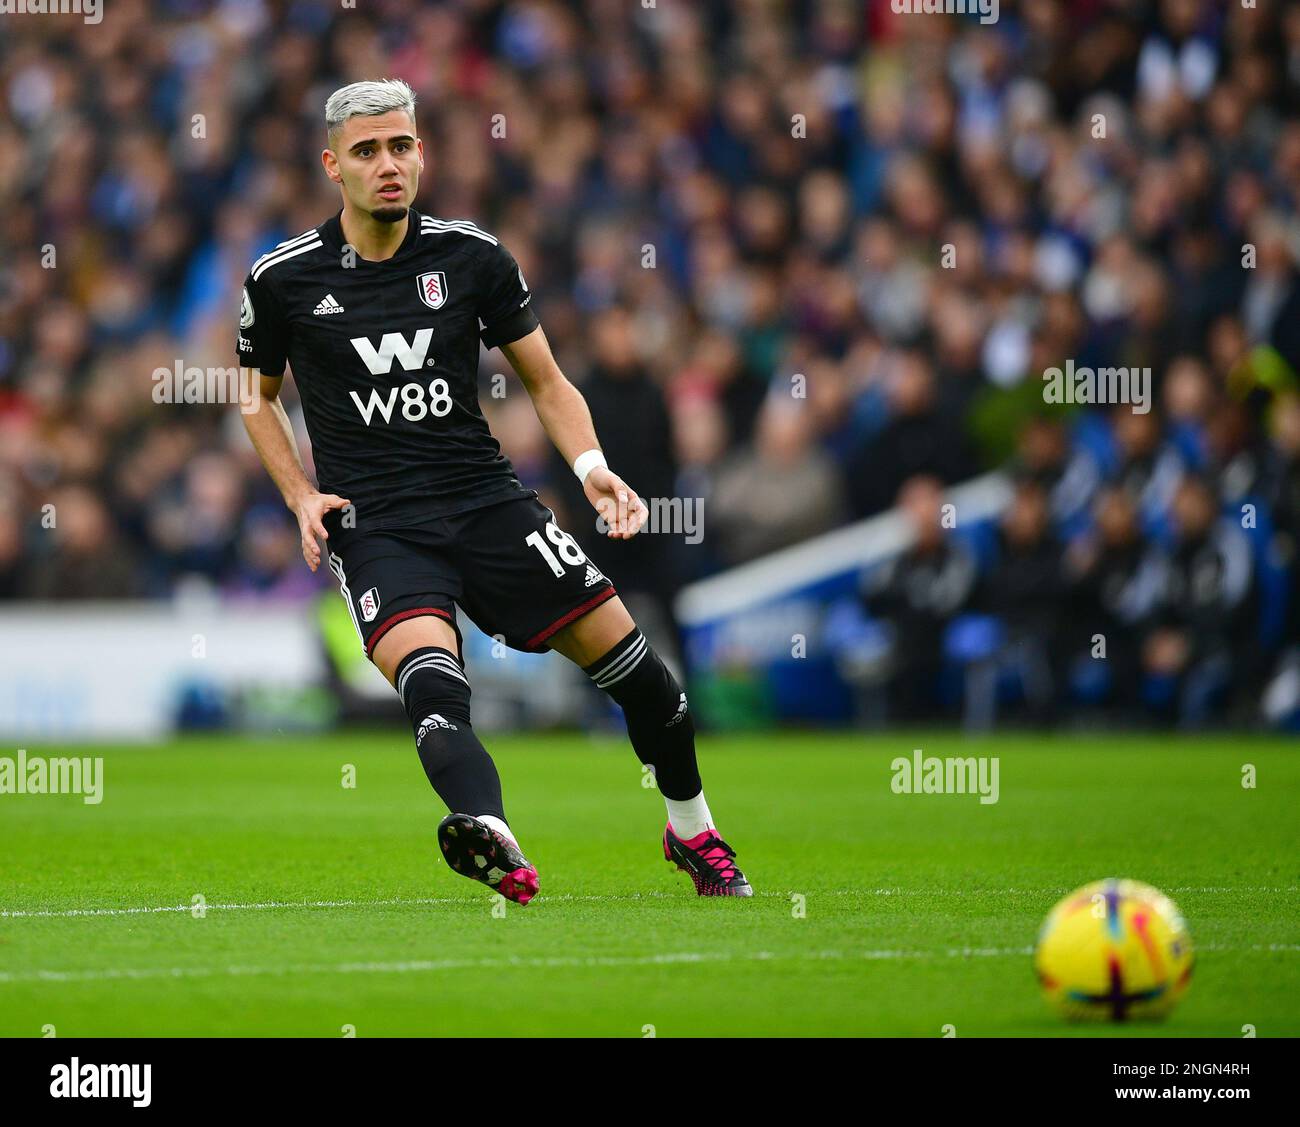 Brighton, UK. 18th Feb, 2023. Andreas Pereira of Fulham FC during the Premier League match between Brighton & Hove Albion and Fulham at The Amex on February 18th 2023 in Brighton, England. (Photo by Jeff Mood/phcimages.com) Credit: PHC Images/Alamy Live News Stock Photo